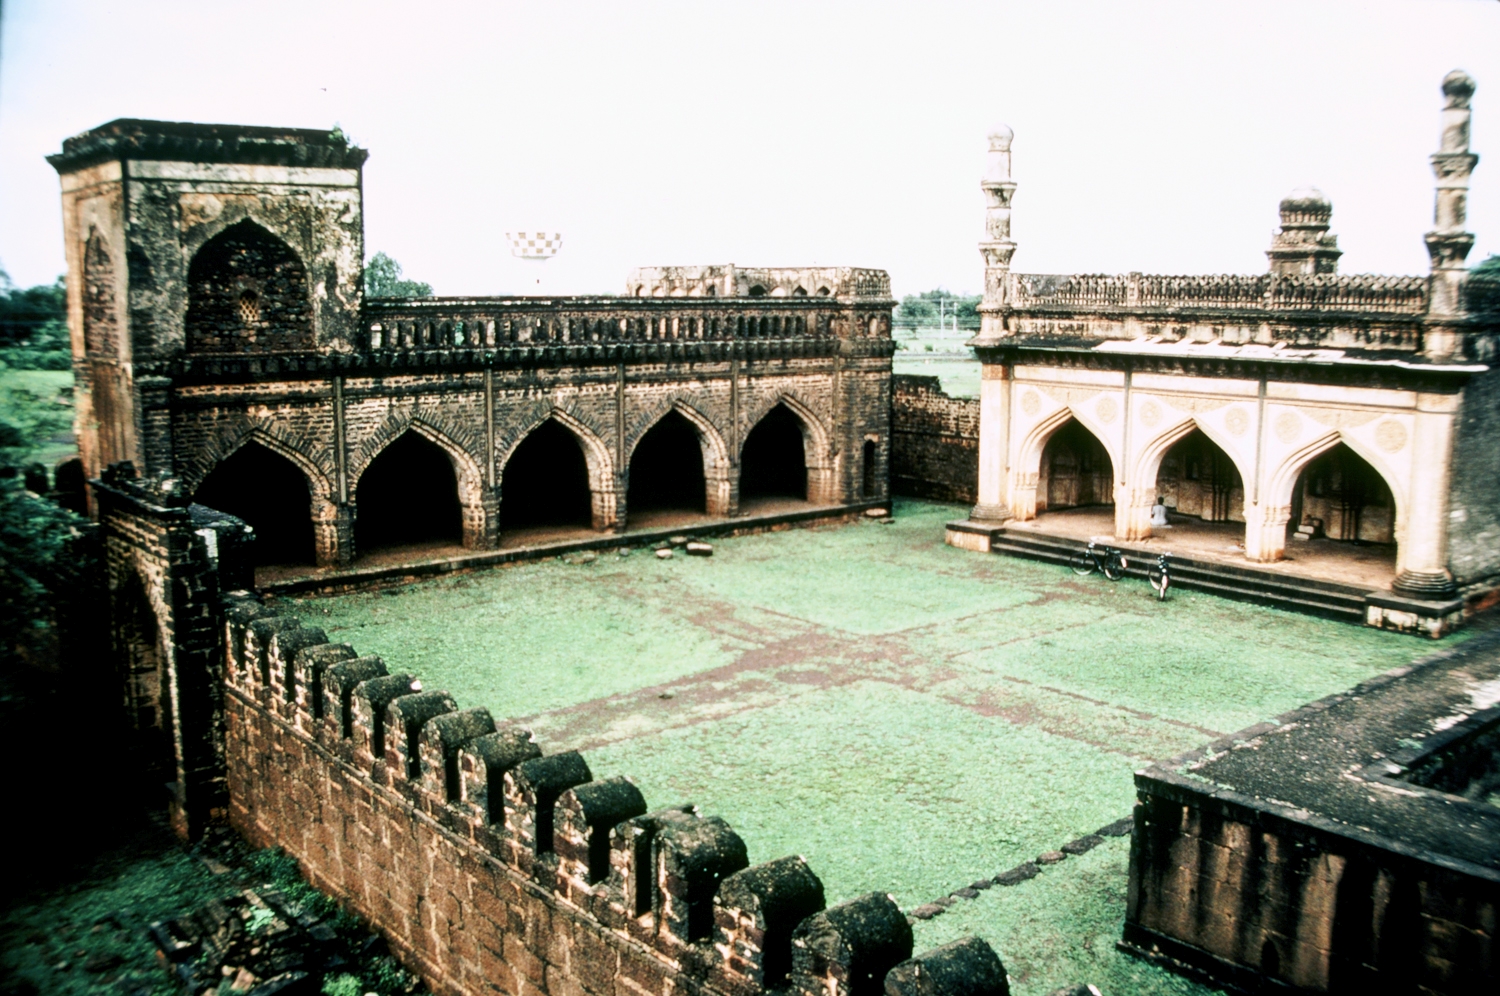 Elevated view of mosque adjacent to tomb, showing courtyard